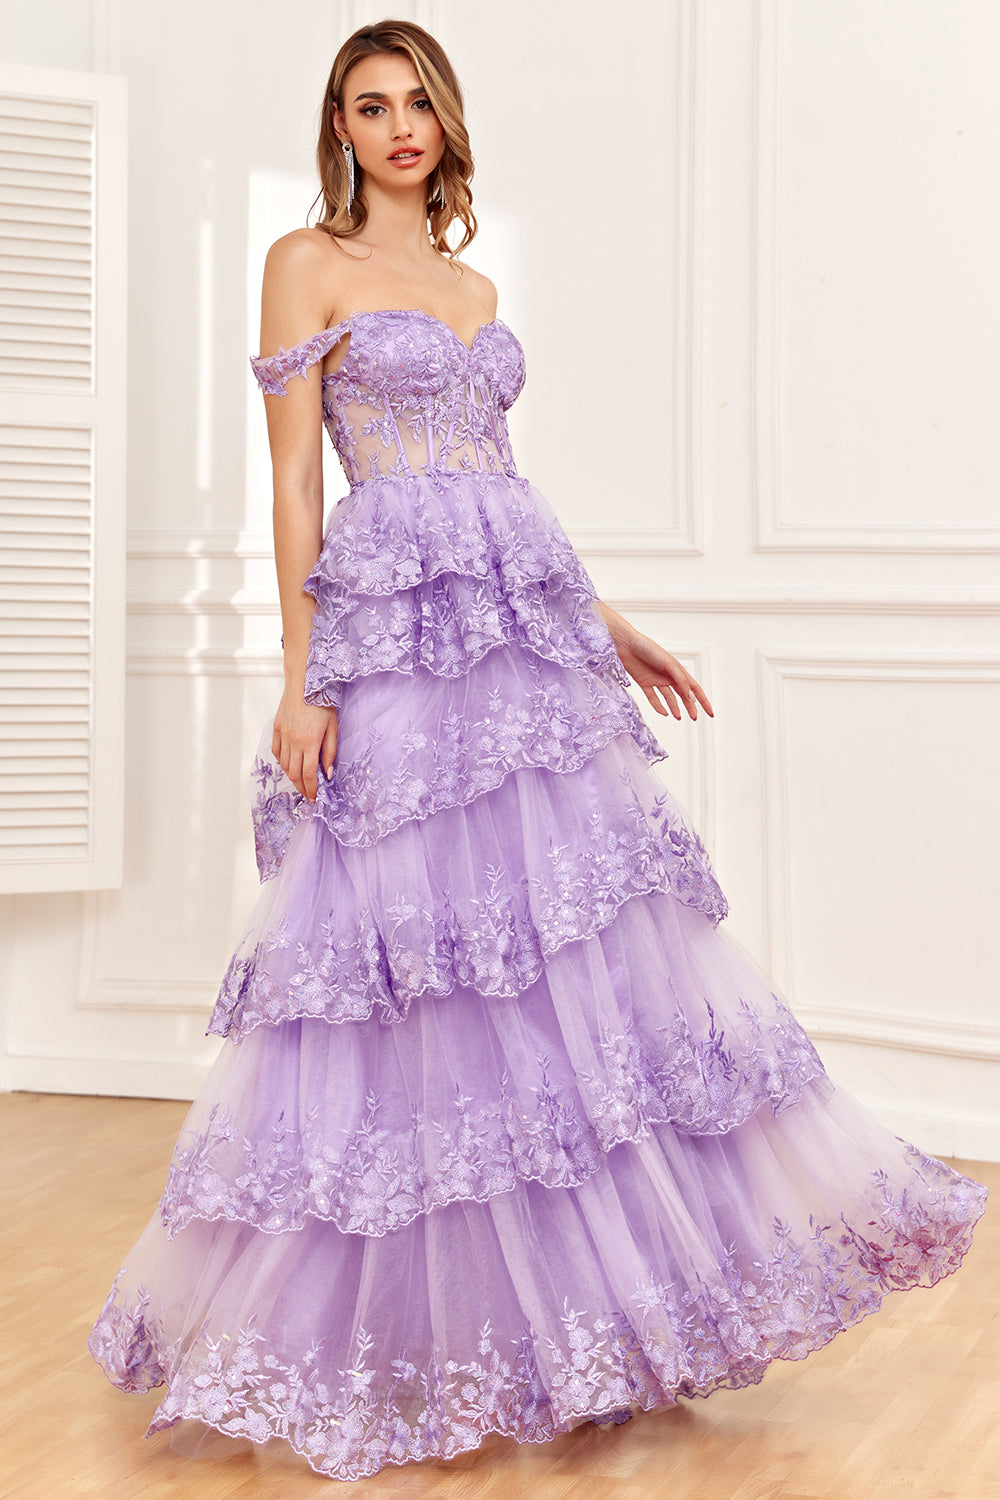 Butterfly Appliques Two-tone Navy and Peach Prom Dress - VQ